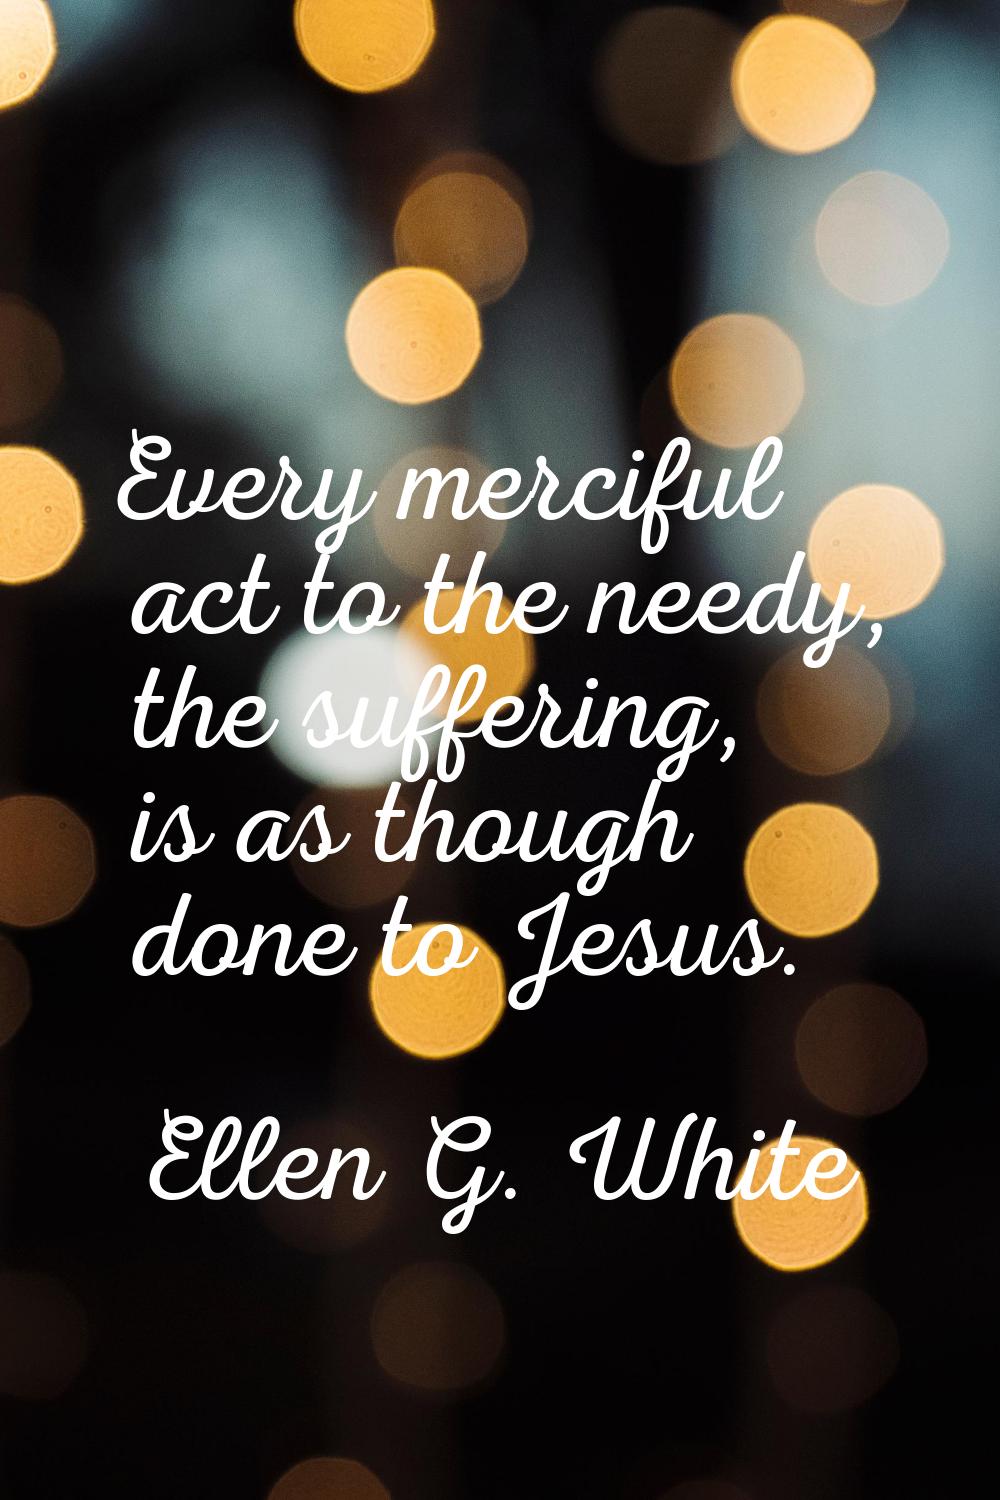 Every merciful act to the needy, the suffering, is as though done to Jesus.